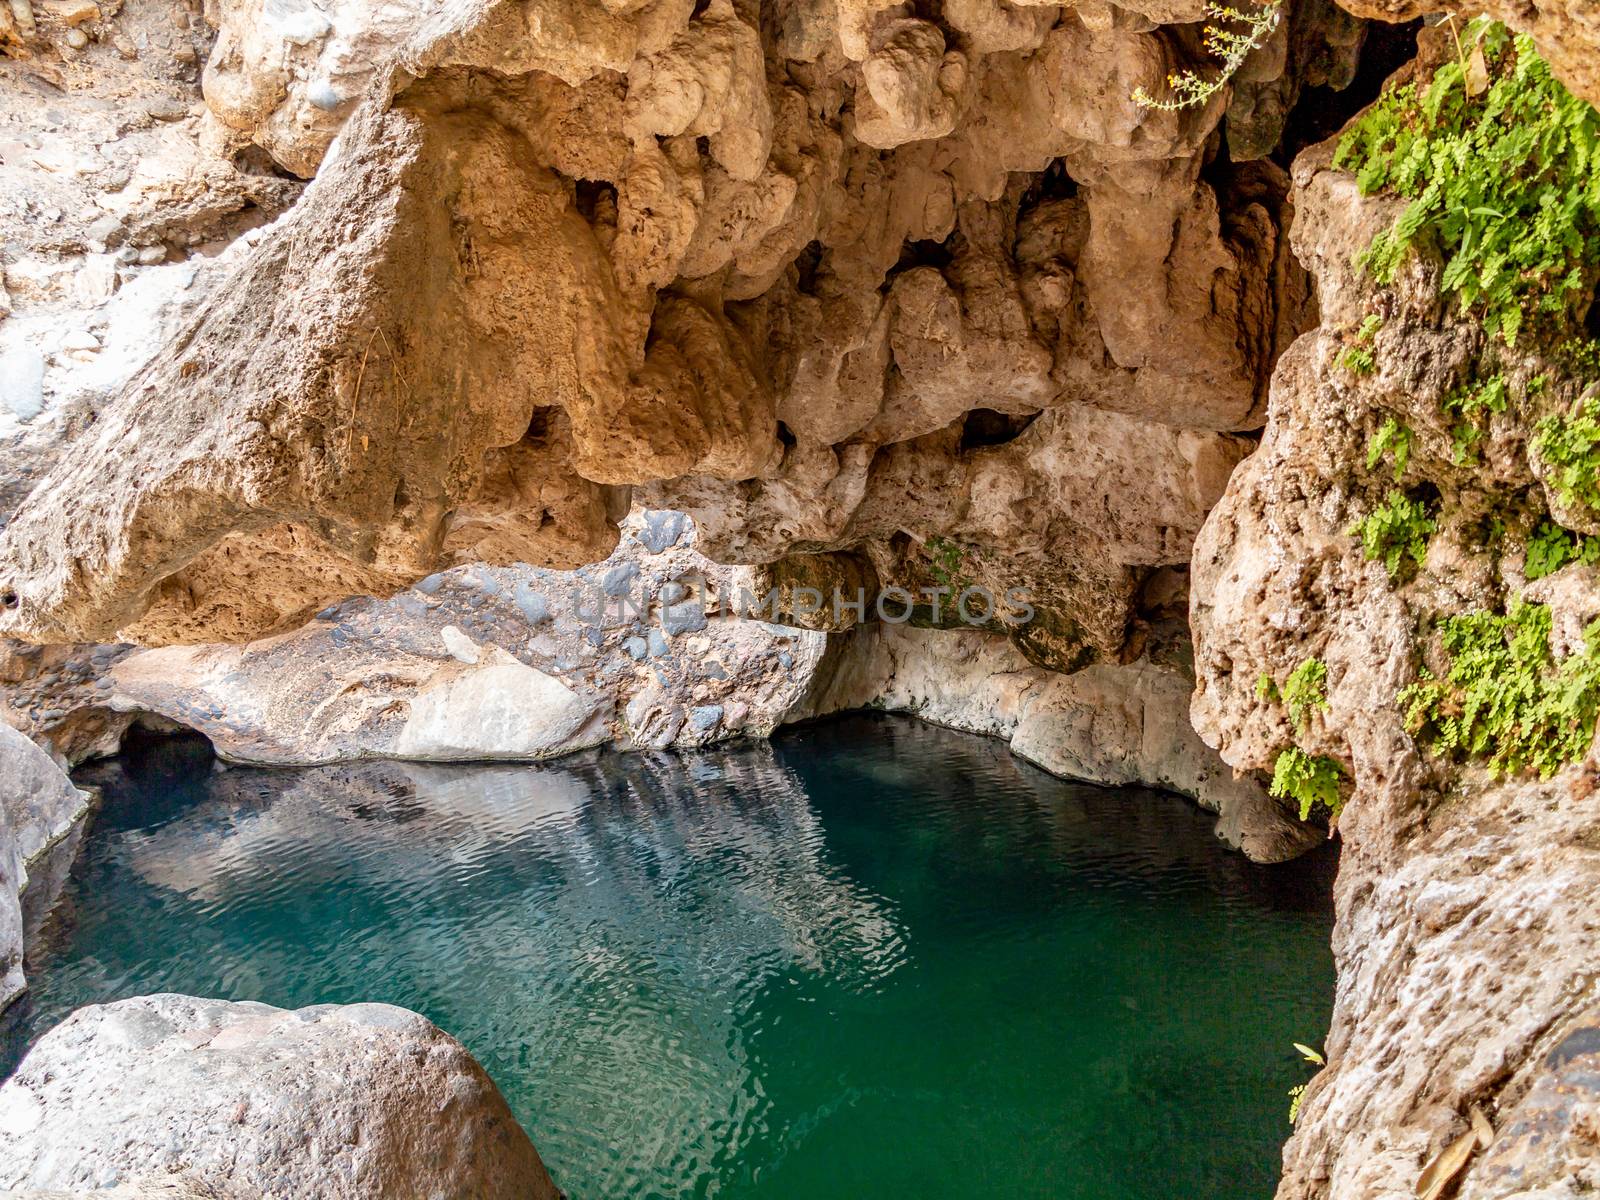 Lagoon in a cave in Wadi near Muscat, Oman by galsand